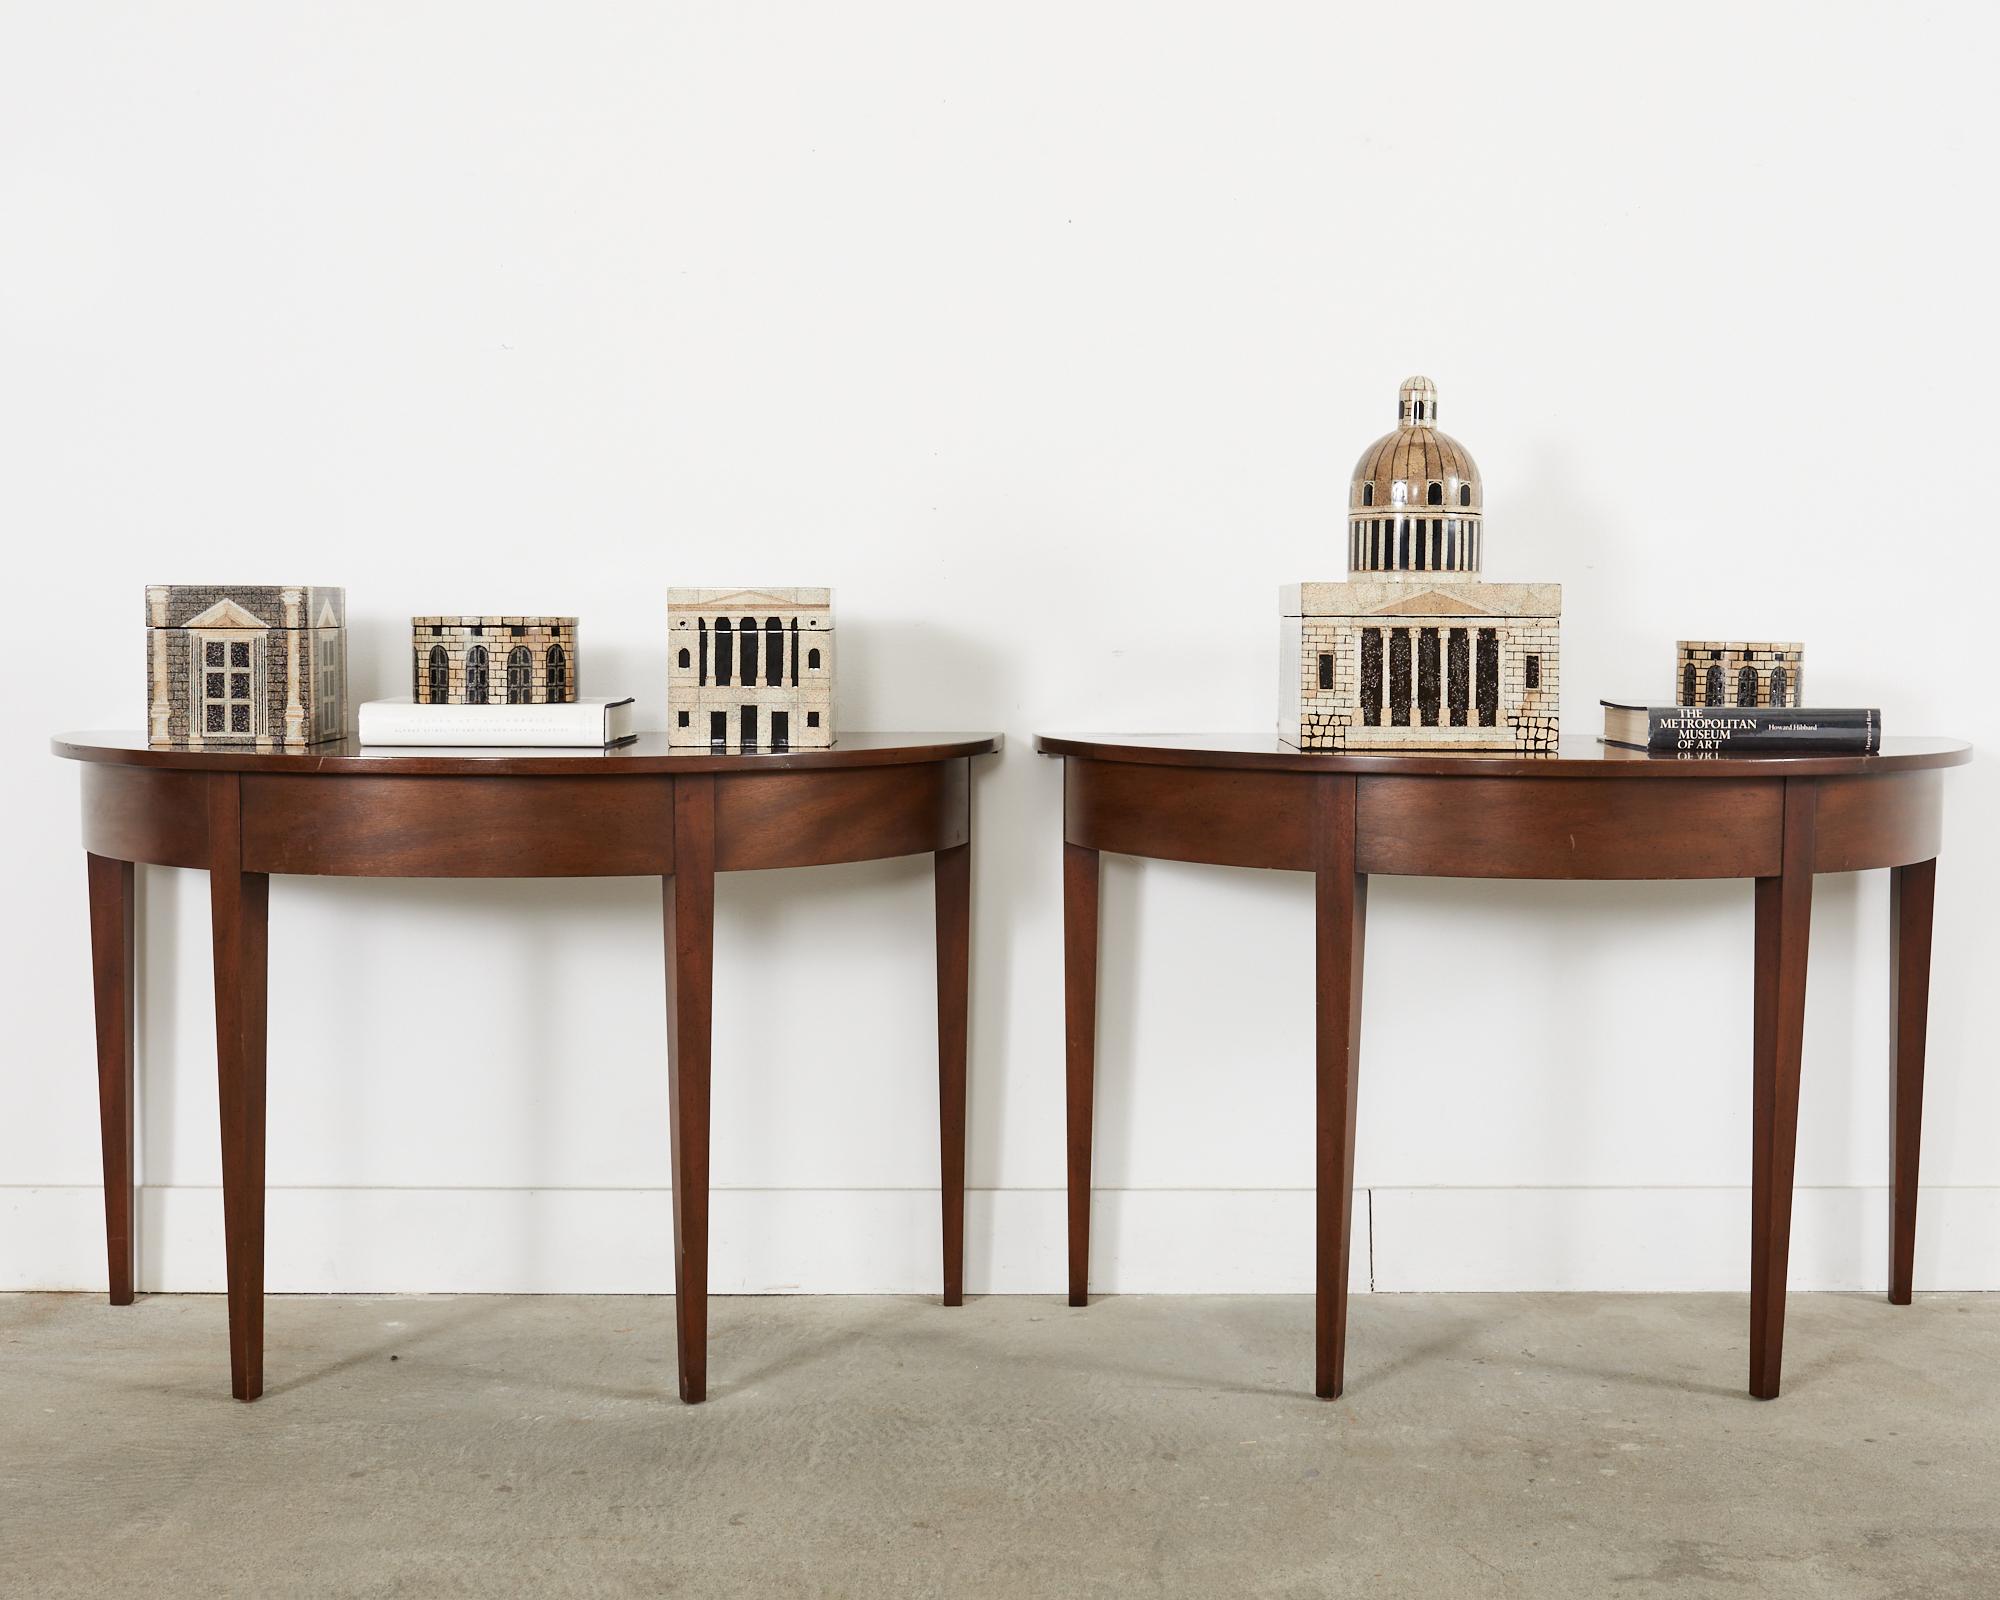 Distinctive pair of mahogany demi-lune console tables hand-crafted by Kittinger. The pair are made with a minimalist aesthetic and free from inlay and decoration as most Georgian period pieces have. The consoles can be used together form a dramatic